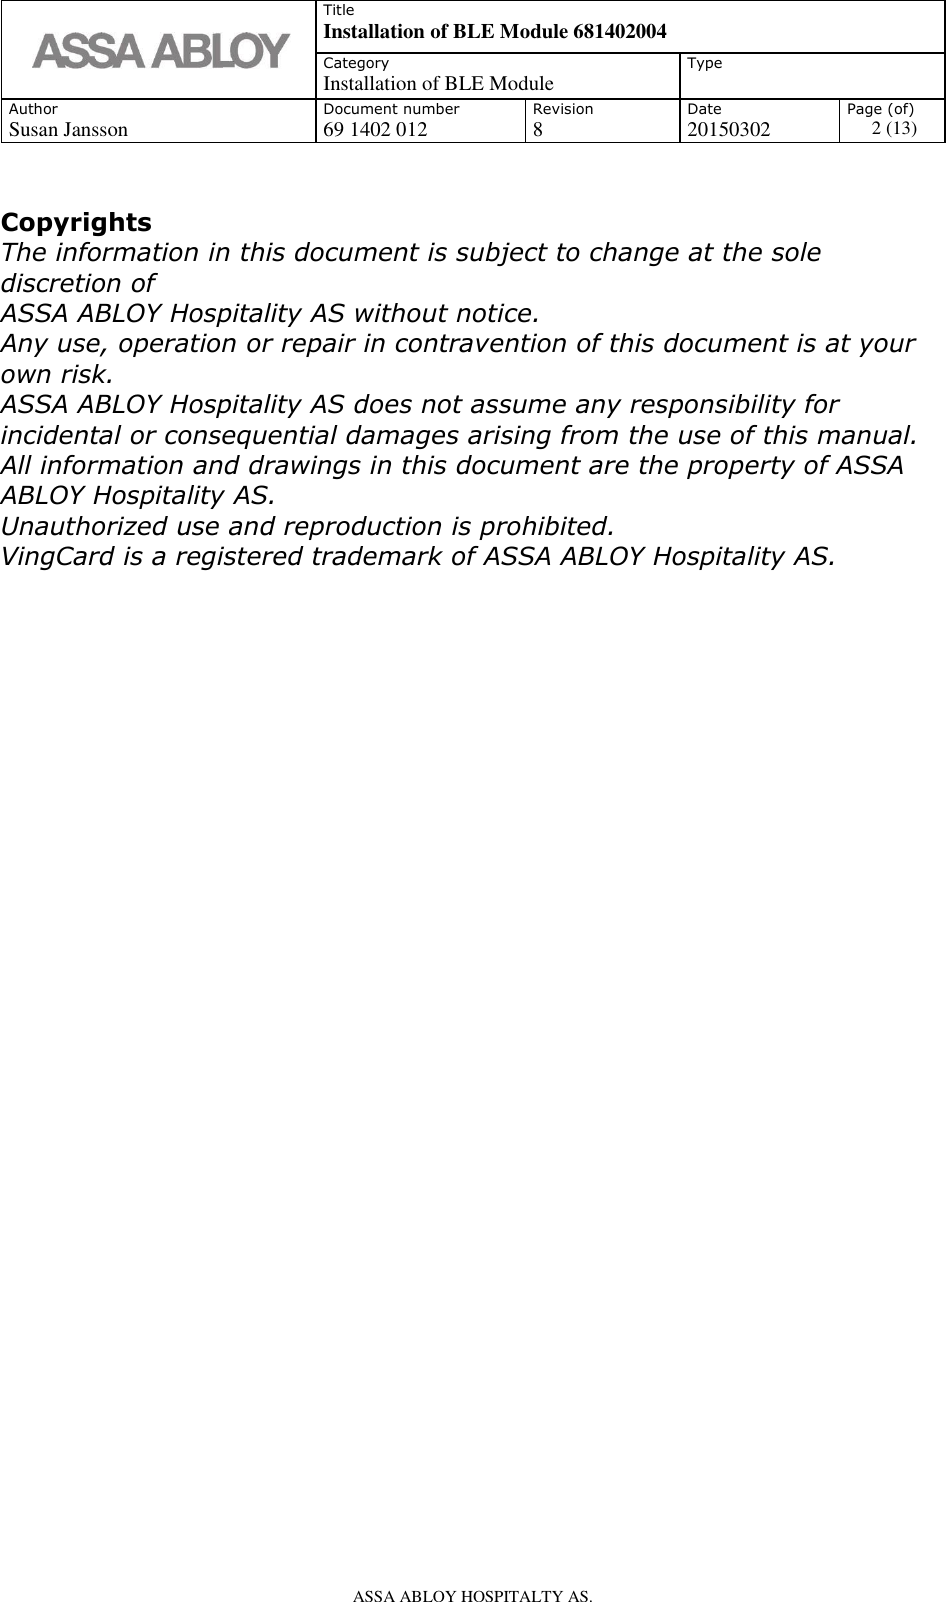   Title Installation of BLE Module 681402004 Category Installation of BLE Module Type  Author Document number Revision Date Page (of) Susan Jansson 69 1402 012 8 20150302 2 (13)    ASSA ABLOY HOSPITALTY AS.          Copyrights The information in this document is subject to change at the sole discretion of ASSA ABLOY Hospitality AS without notice. Any use, operation or repair in contravention of this document is at your own risk. ASSA ABLOY Hospitality AS does not assume any responsibility for incidental or consequential damages arising from the use of this manual. All information and drawings in this document are the property of ASSA ABLOY Hospitality AS. Unauthorized use and reproduction is prohibited. VingCard is a registered trademark of ASSA ABLOY Hospitality AS.                                